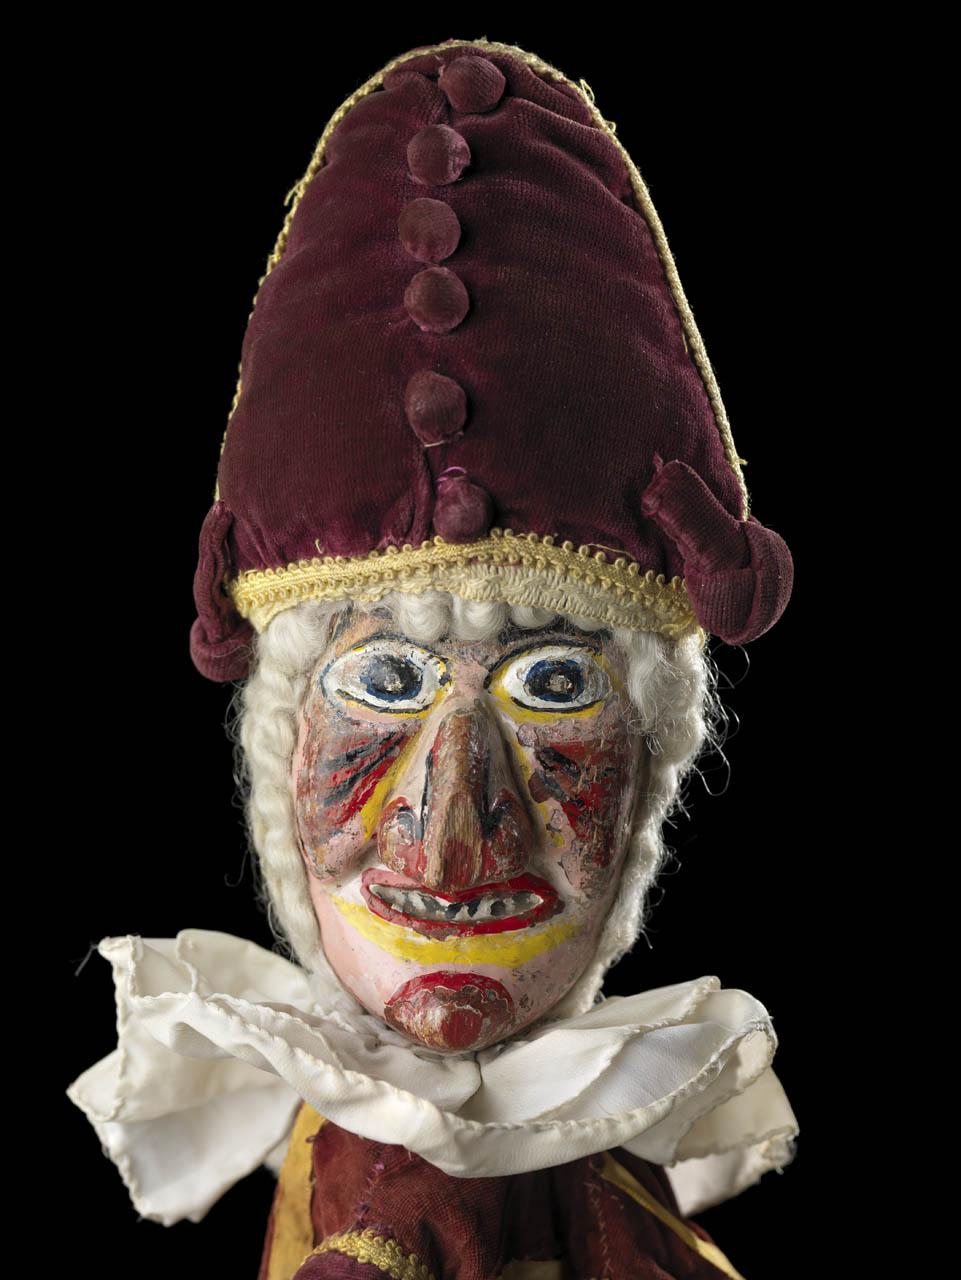 A hand puppet used in Punch and Judy shows. The figure has a red cap, bulbous eyes and painted nose